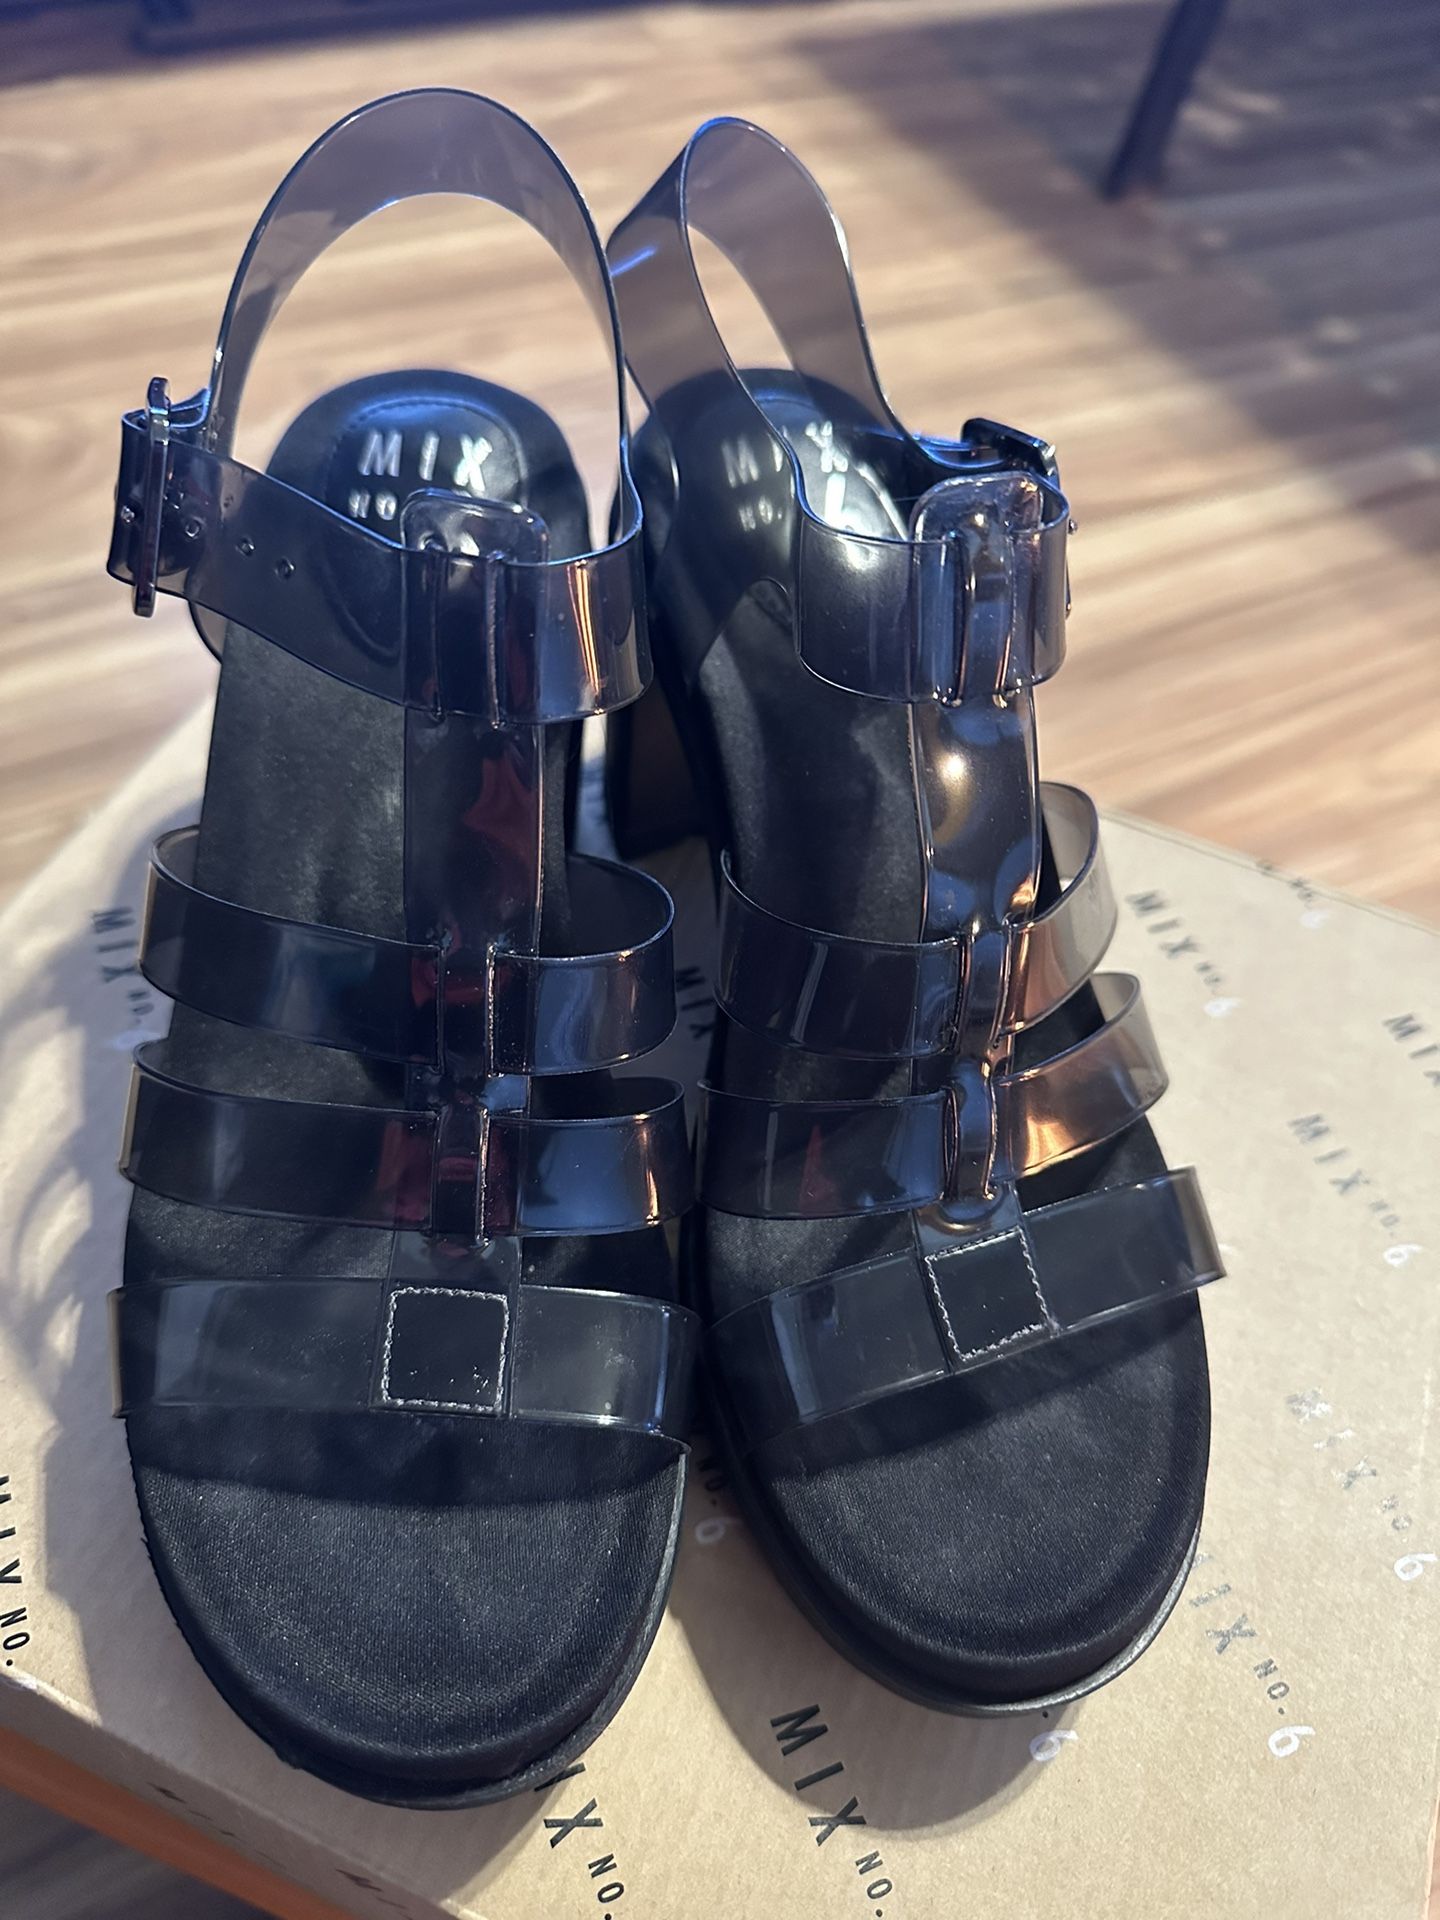 Mix No 6 Chloe Sandals Strappy Heels ~ Clear Black ~ Size 6M